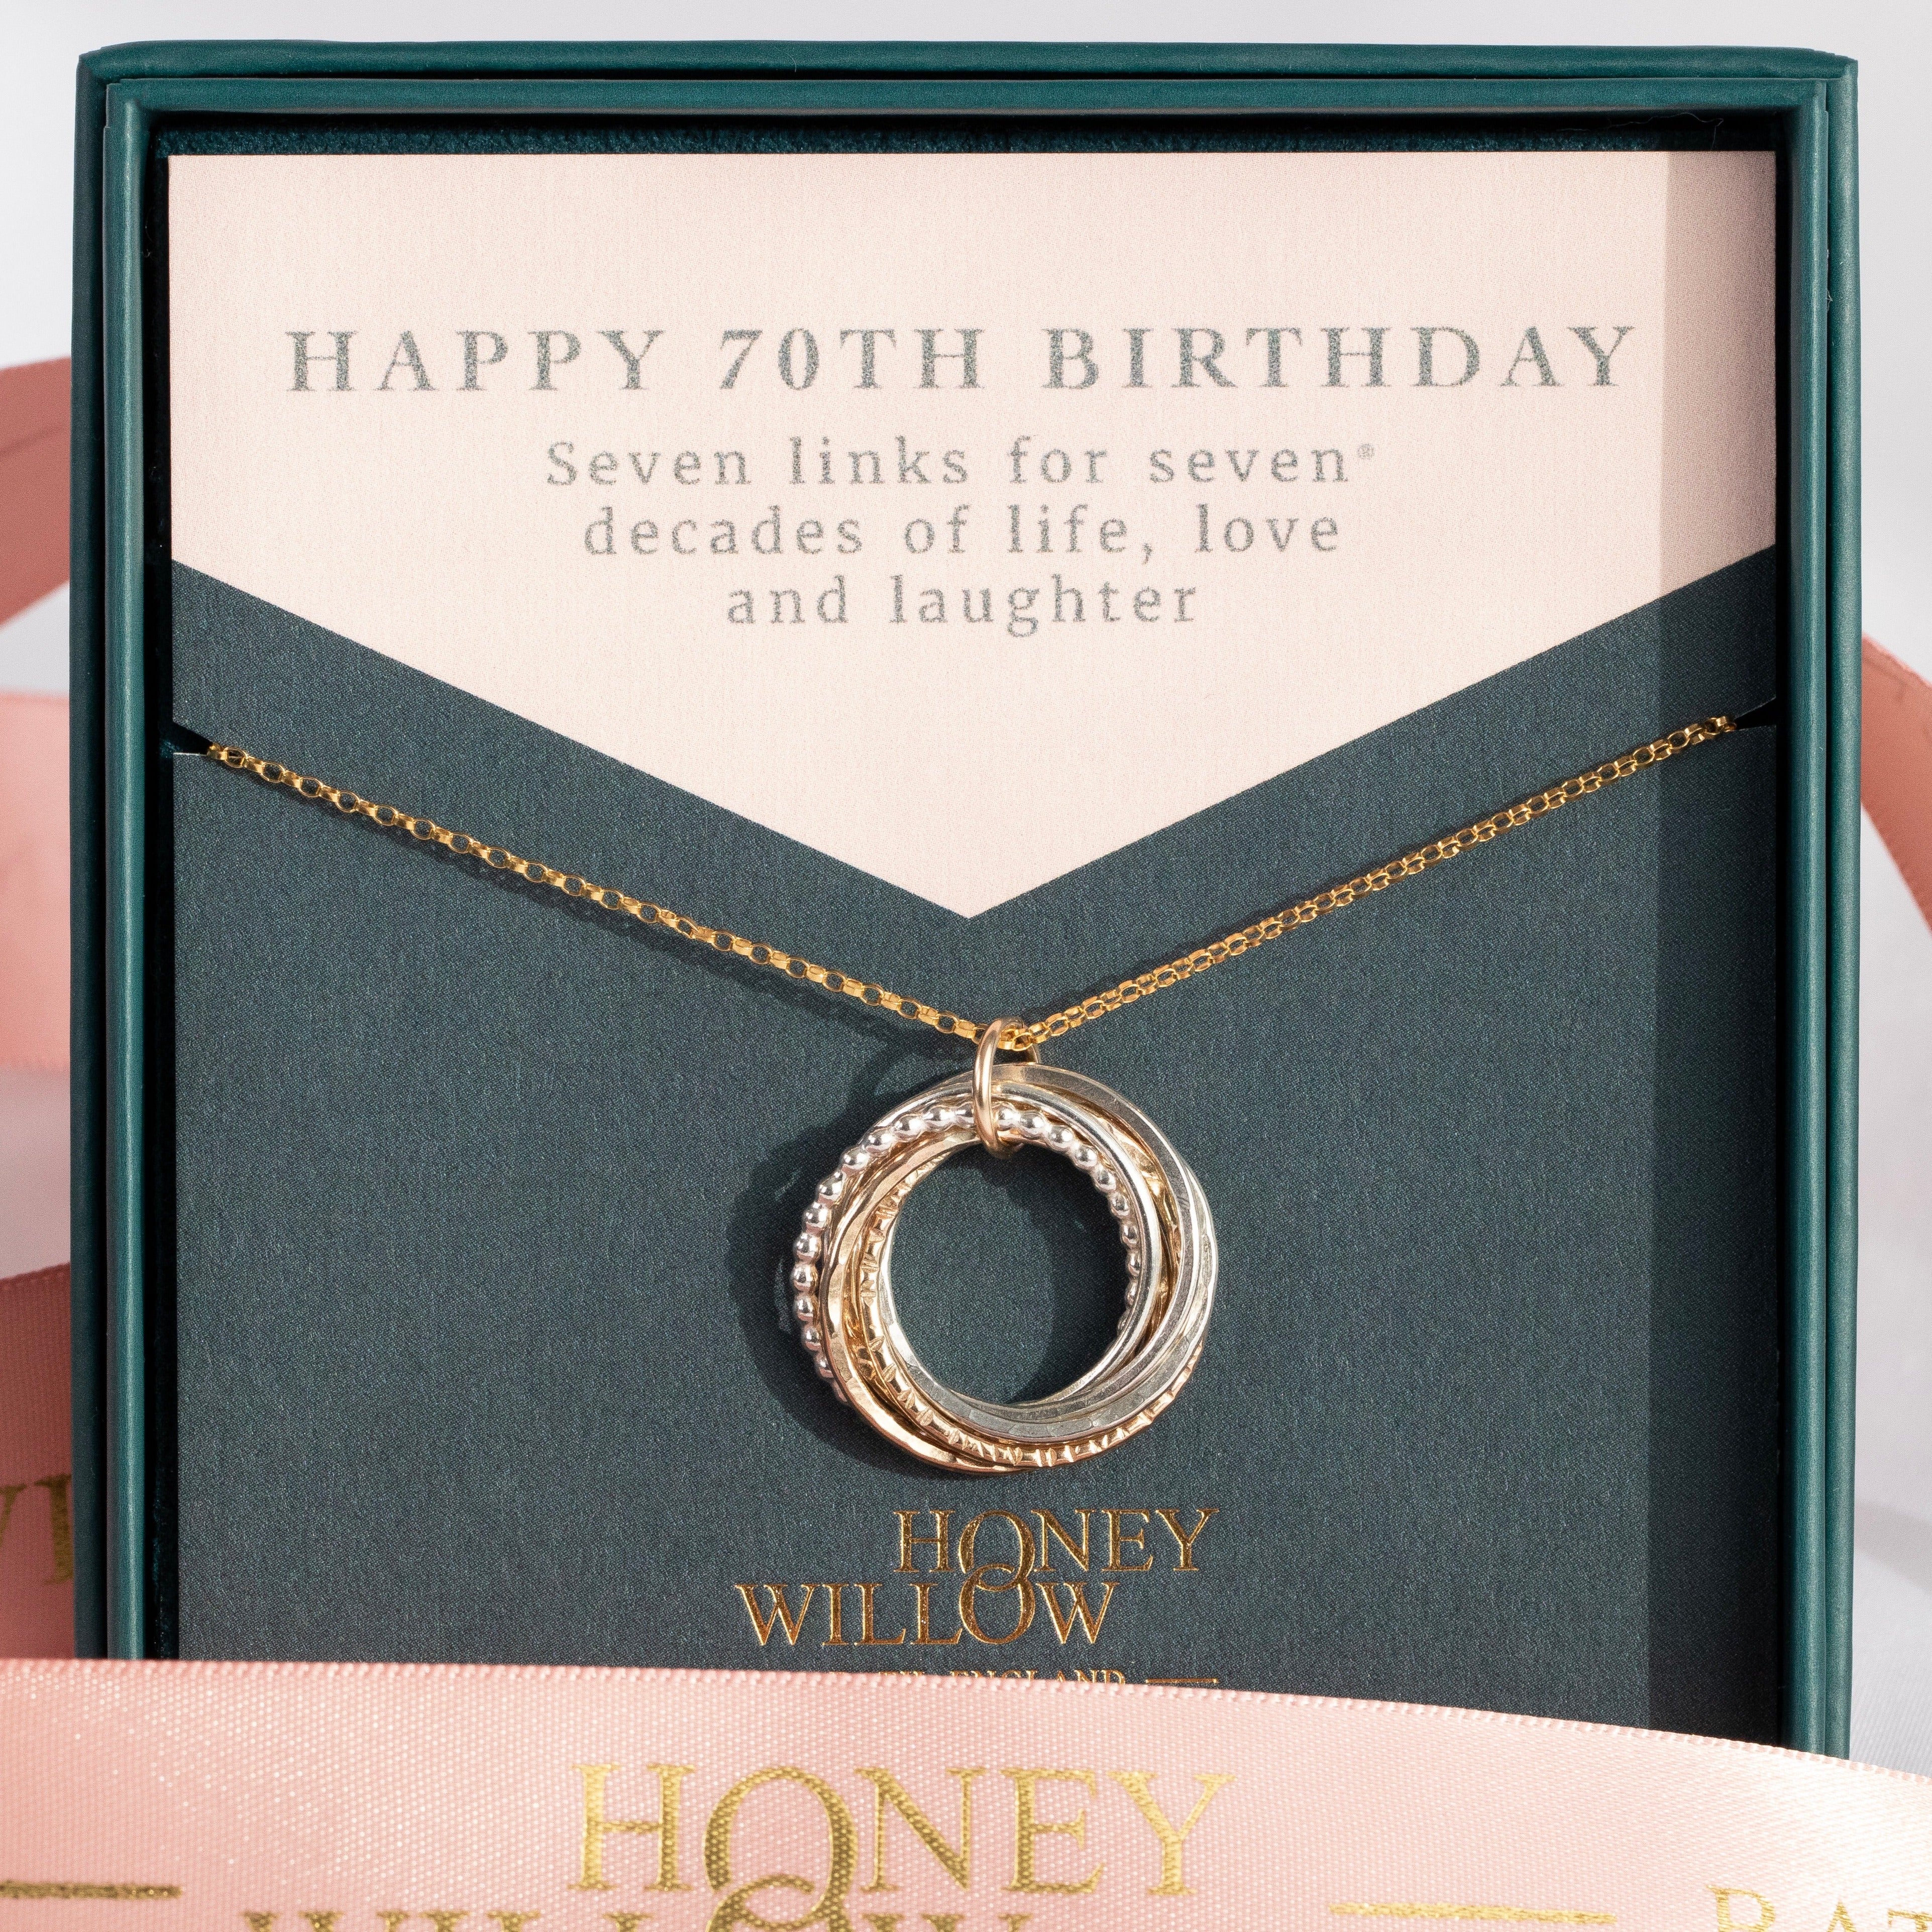 Petite necklace, 70th Birthday gif for mom, 70th Birthday necklace,7th  Anniversary gift, 70th Birthday gift for women, 7 Rings for 7 decades